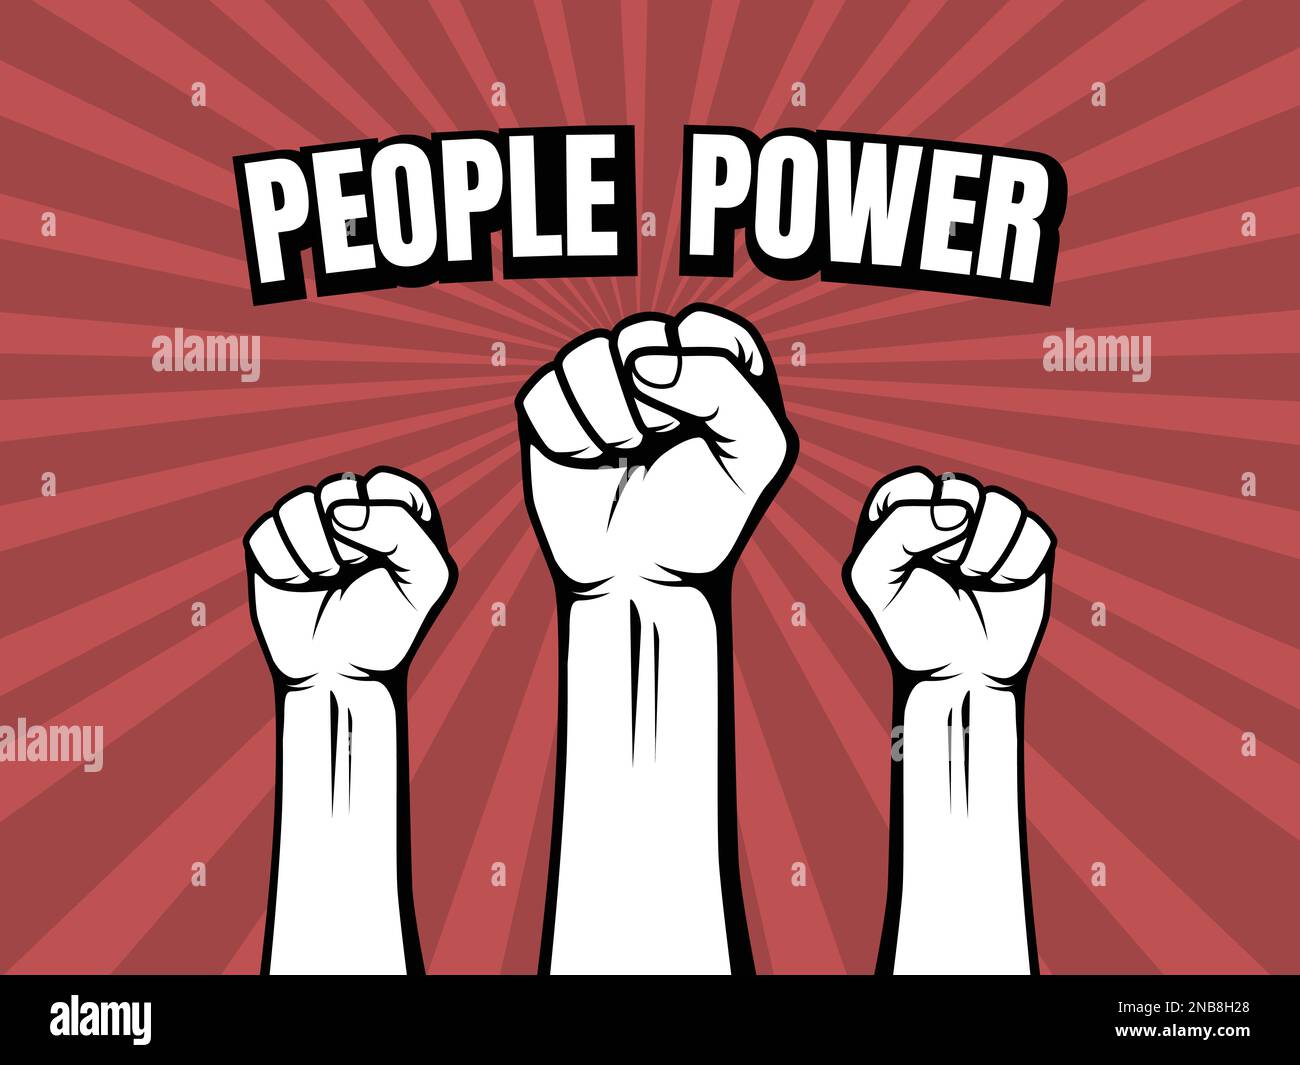 Retro Illustration Hand Clenched,  People Power - Protest Art Vector Illustration Stock Vector